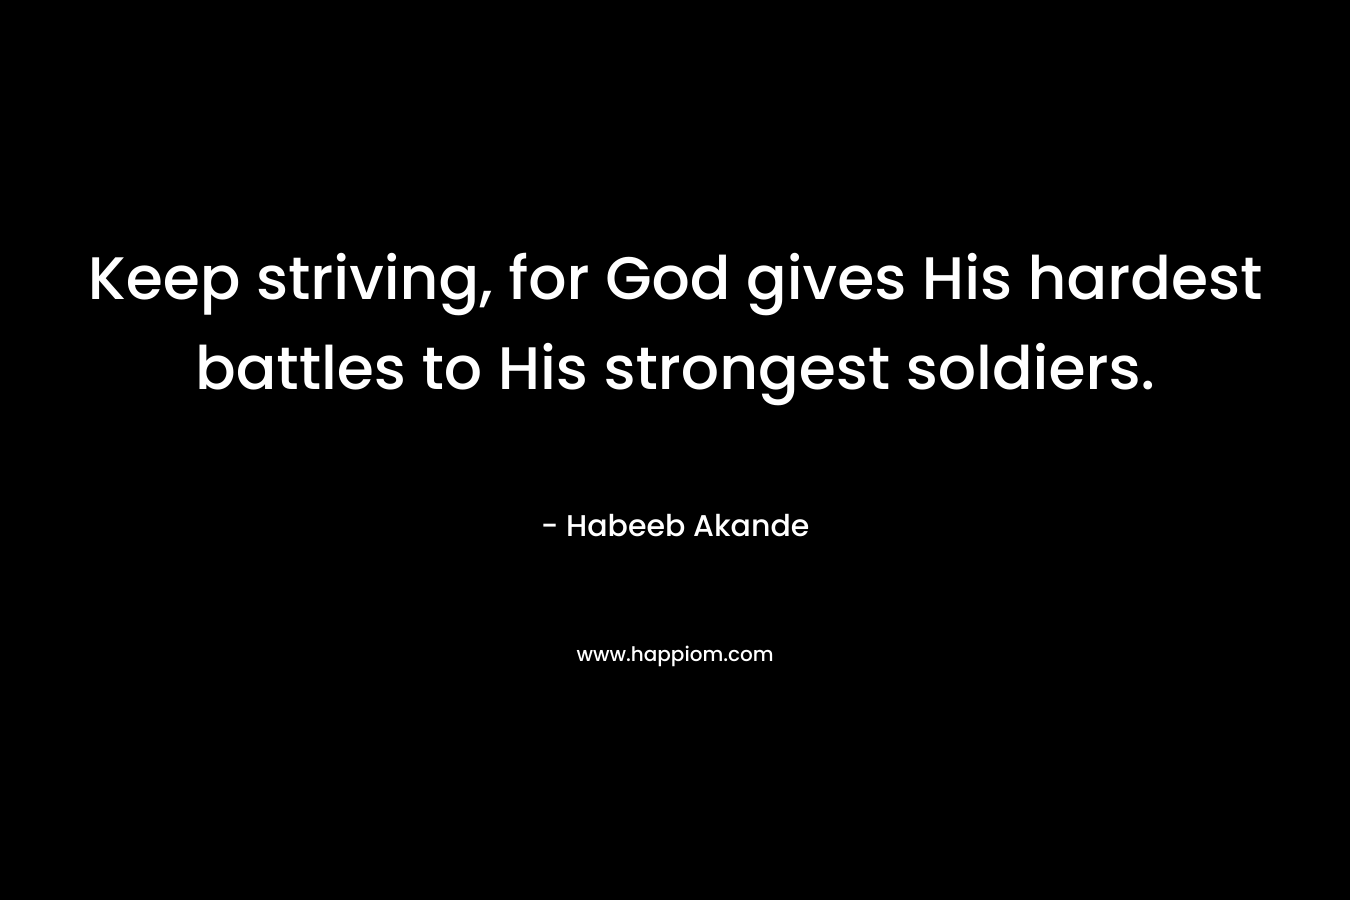 Keep striving, for God gives His hardest battles to His strongest soldiers. – Habeeb Akande